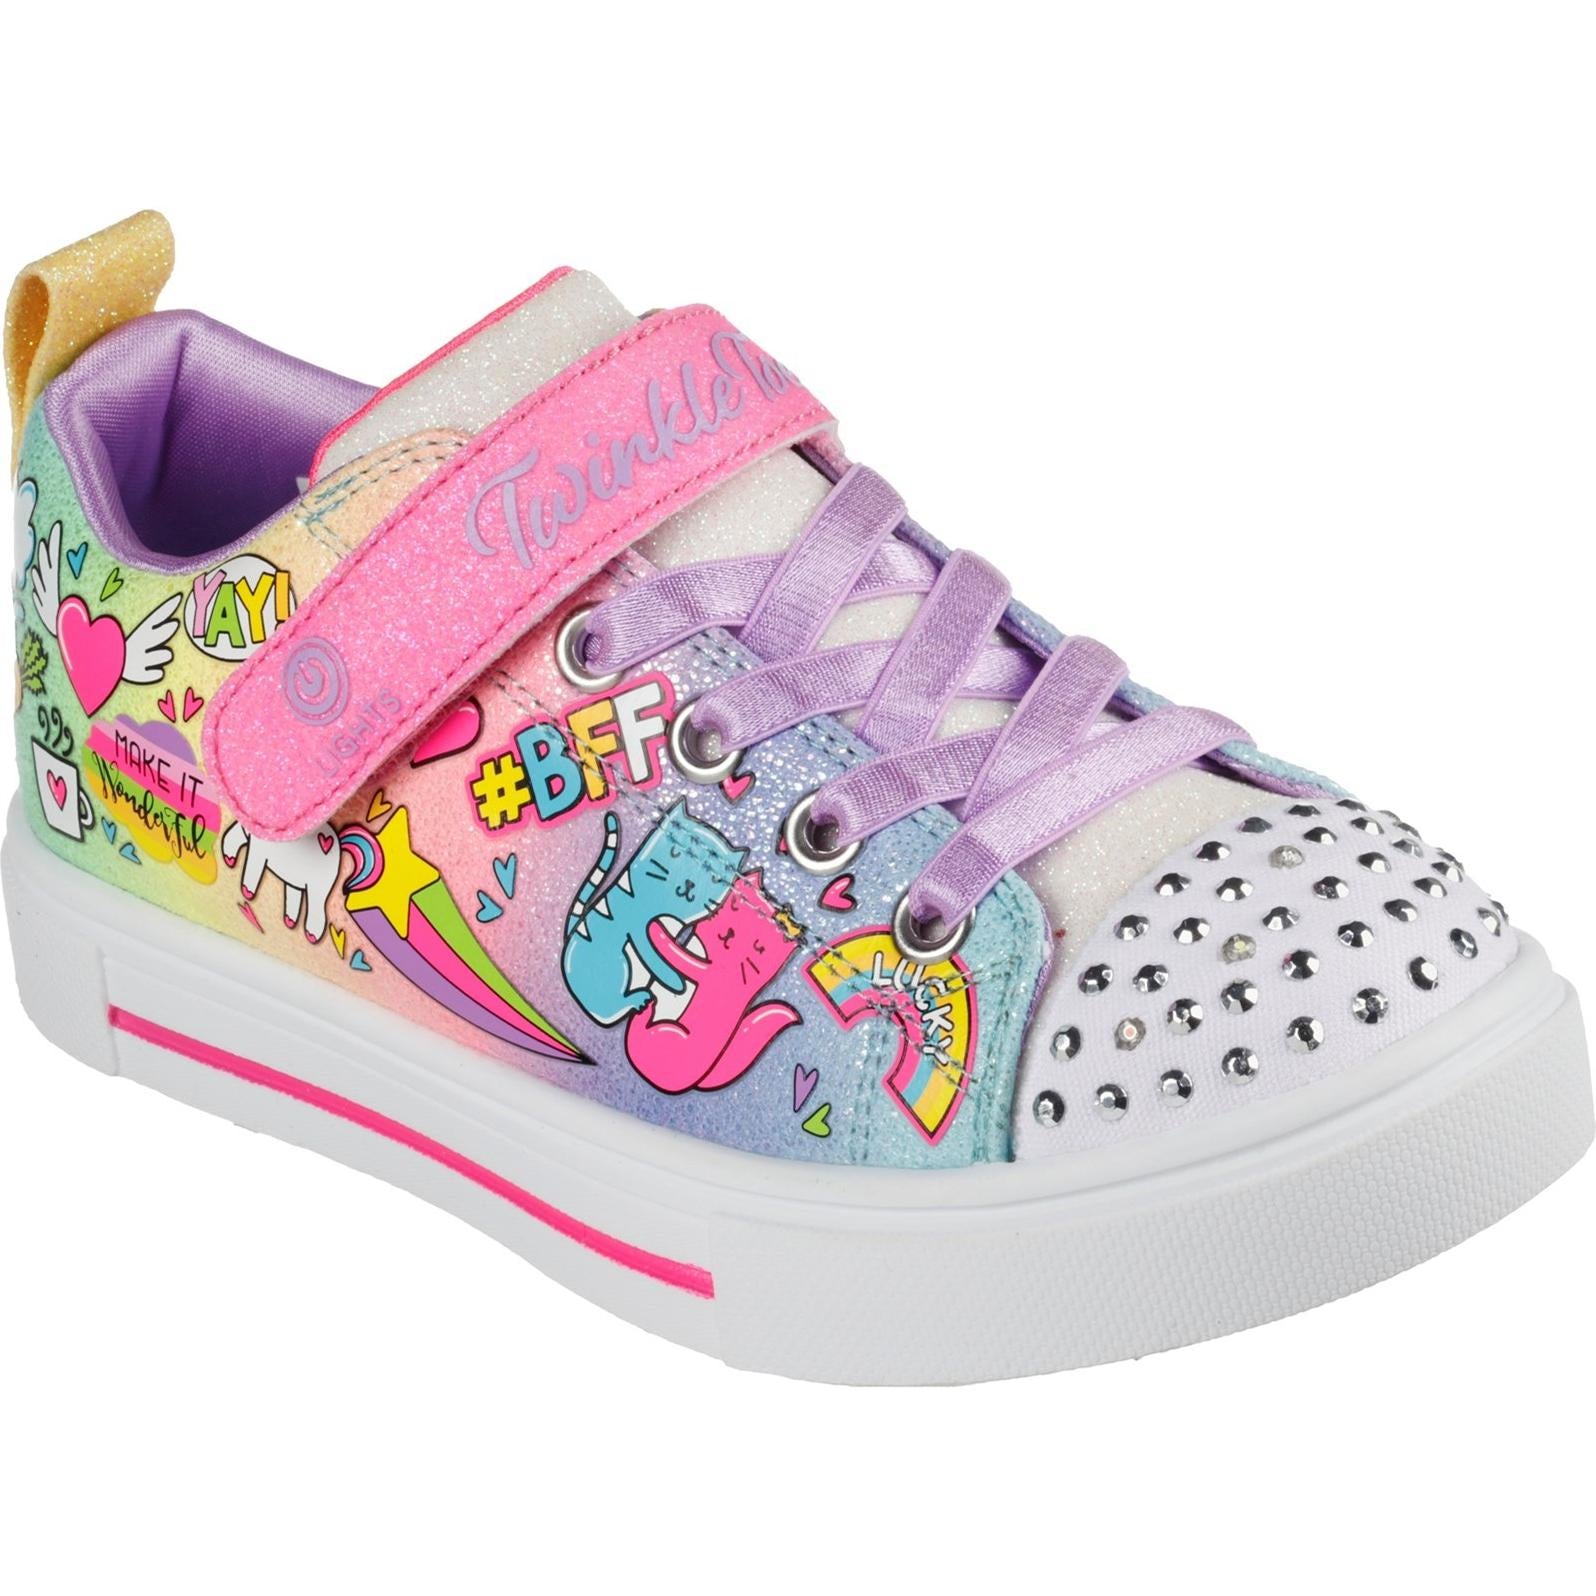 Skechers Twinkle Sparks Bff Magic Trainers